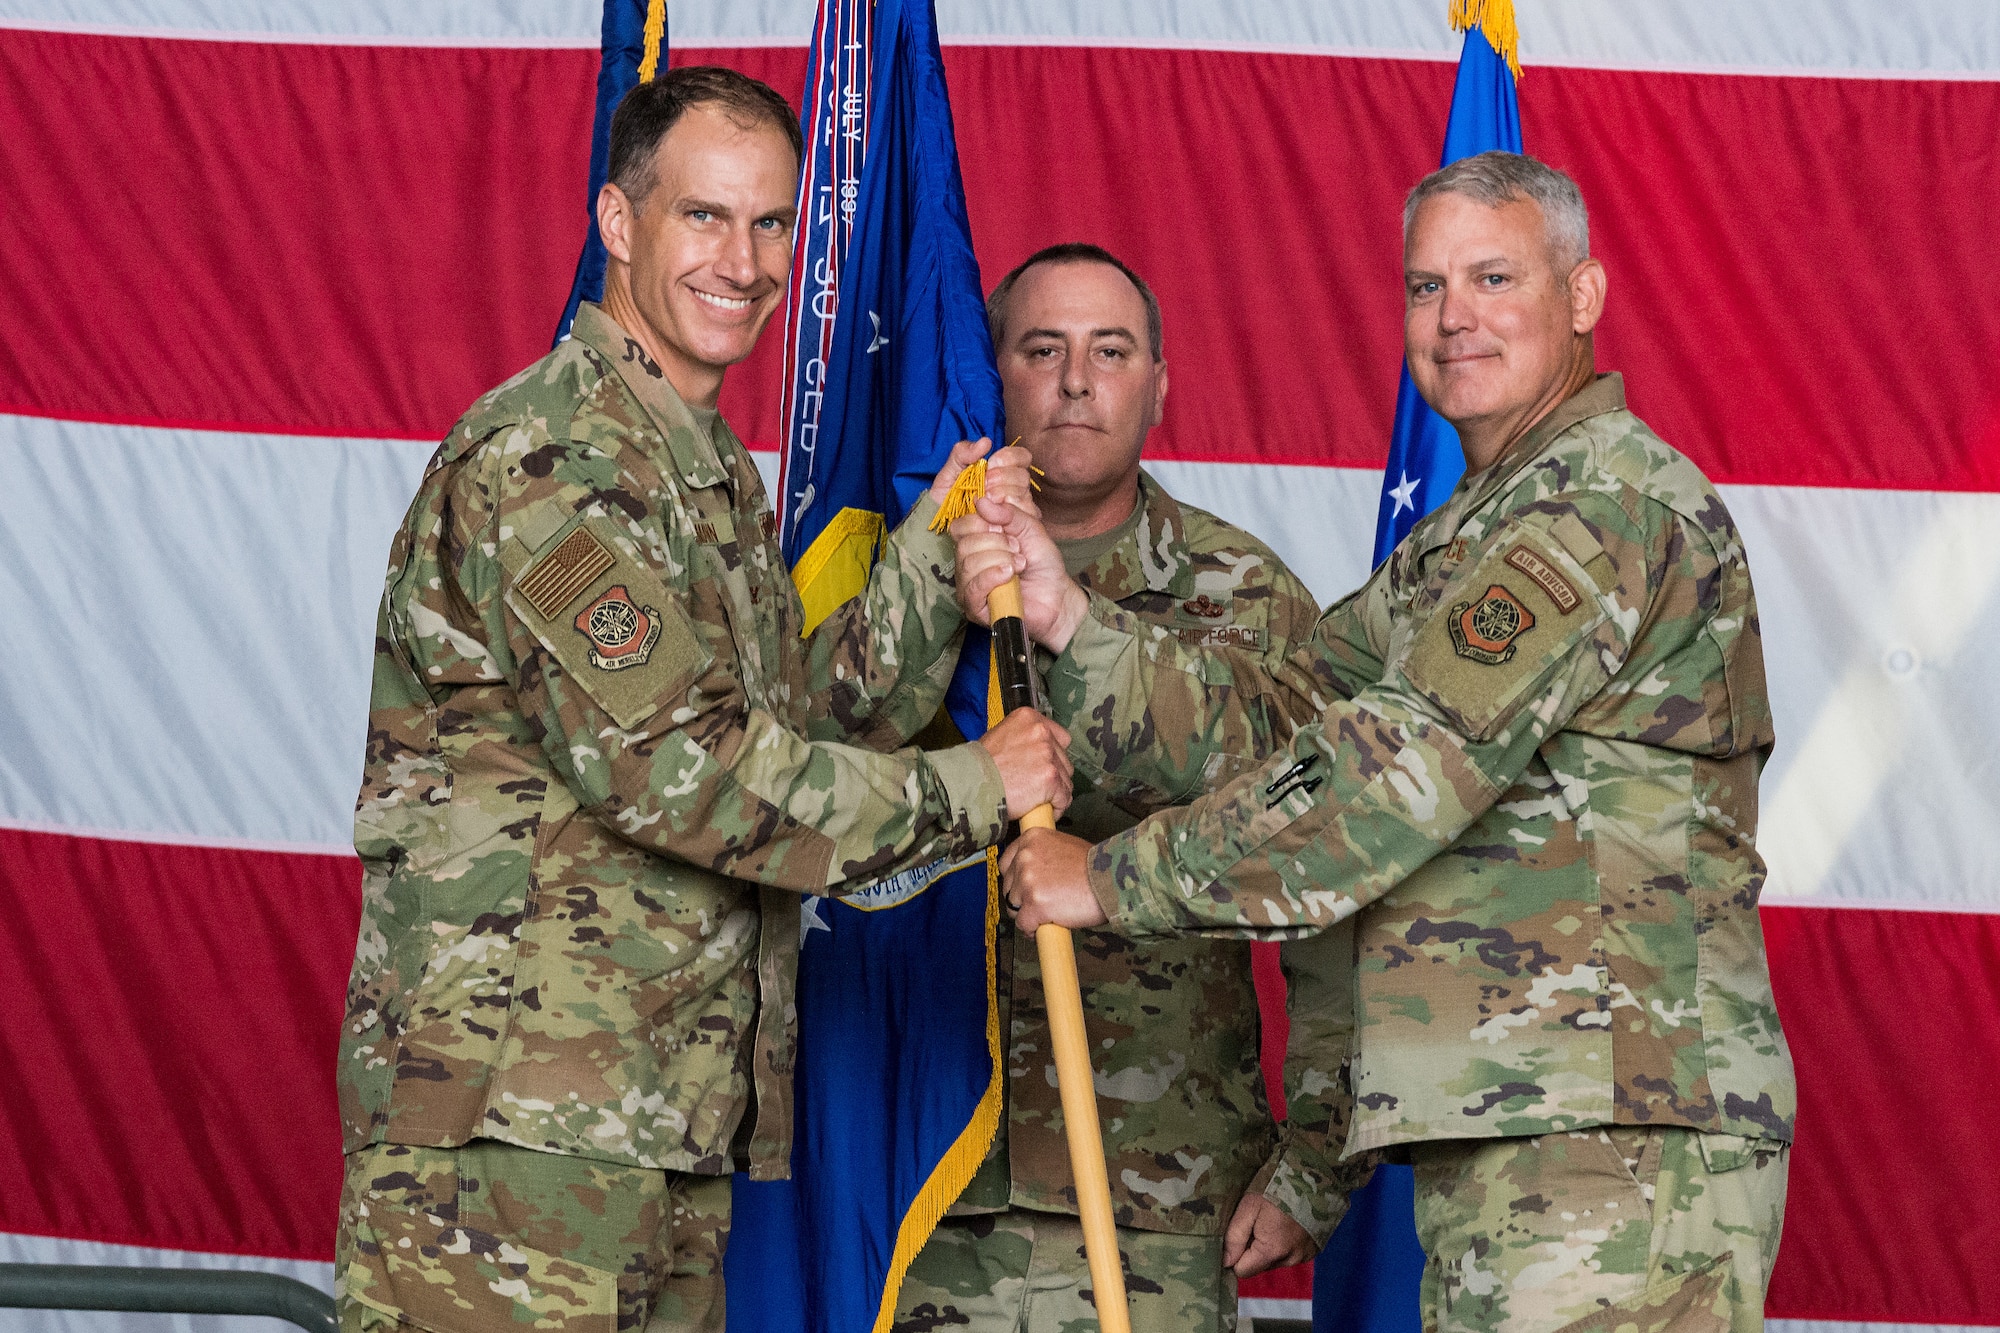 Col. Matt Husemann, left, 436th Airlift Wing commander, accepts the 436th Maintenance Group guidon from Col. Christopher May, 436th MXG commander, during the 436th MXG Change of Command ceremony on Dover Air Force Base, Delaware, June 11, 2021. May relinquished command to Col. Bary Flack. The 436th MXG supports the worldwide global mobility mission by providing trained maintenance specialists for two of the Air Force's cargo transport aircraft, the C-5M Super Galaxy and the C-17A Globemaster III. (U.S. Air Force photo by Roland Balik)